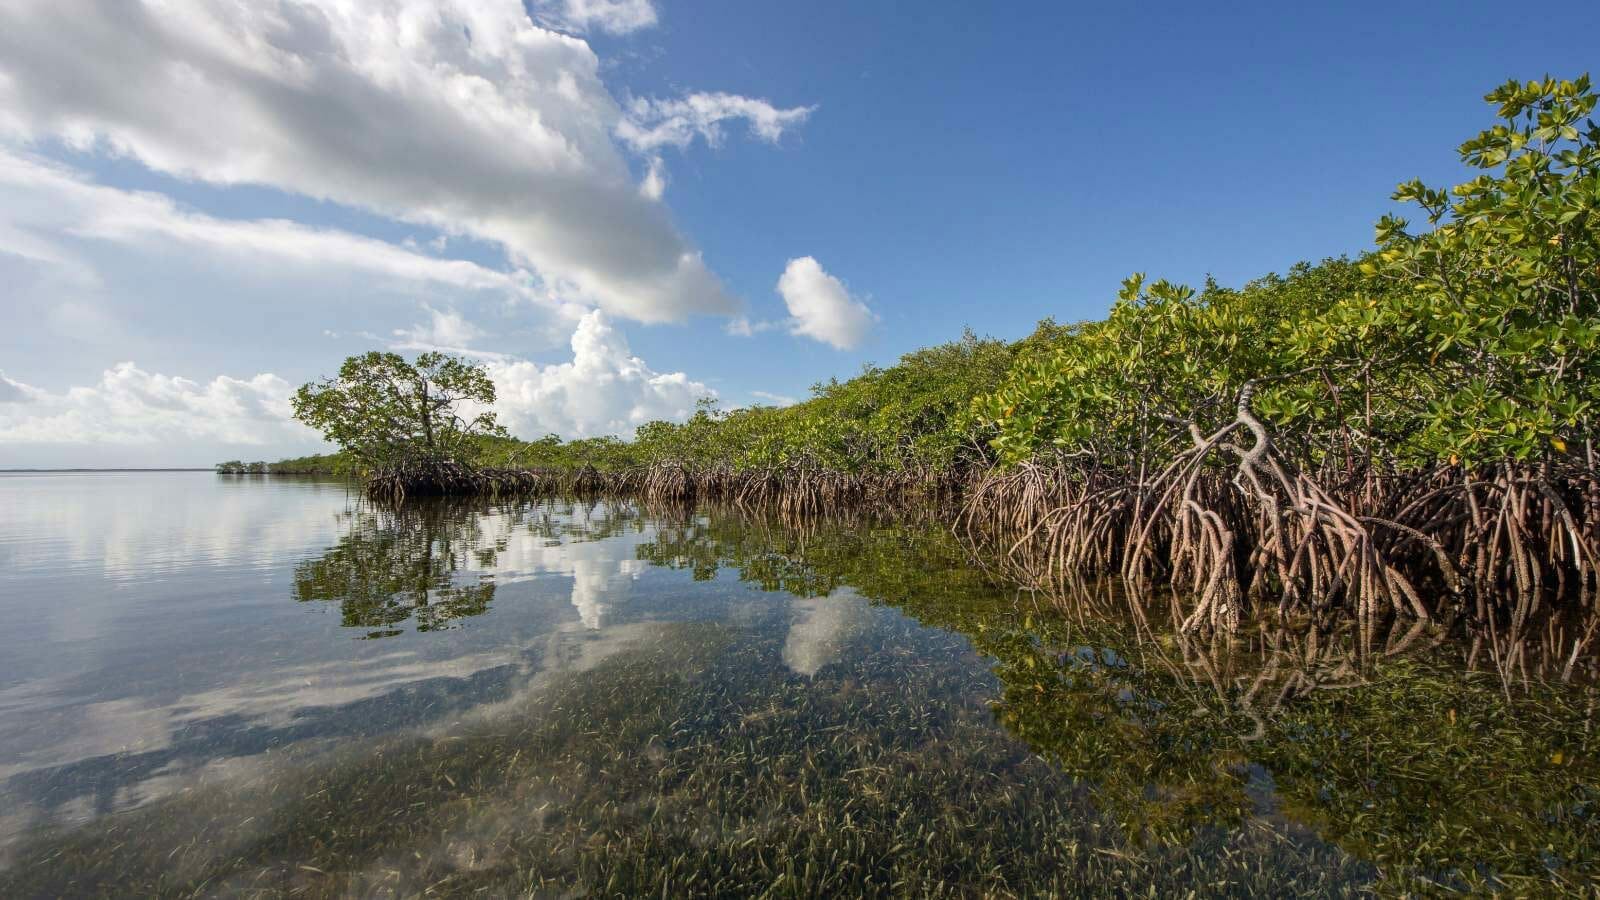 <p>Biscayne National Park is one of the least crowded sites managed by the National Park Service. It covers a total of 172,000 acres, and 95% of the park is underwater.</p>